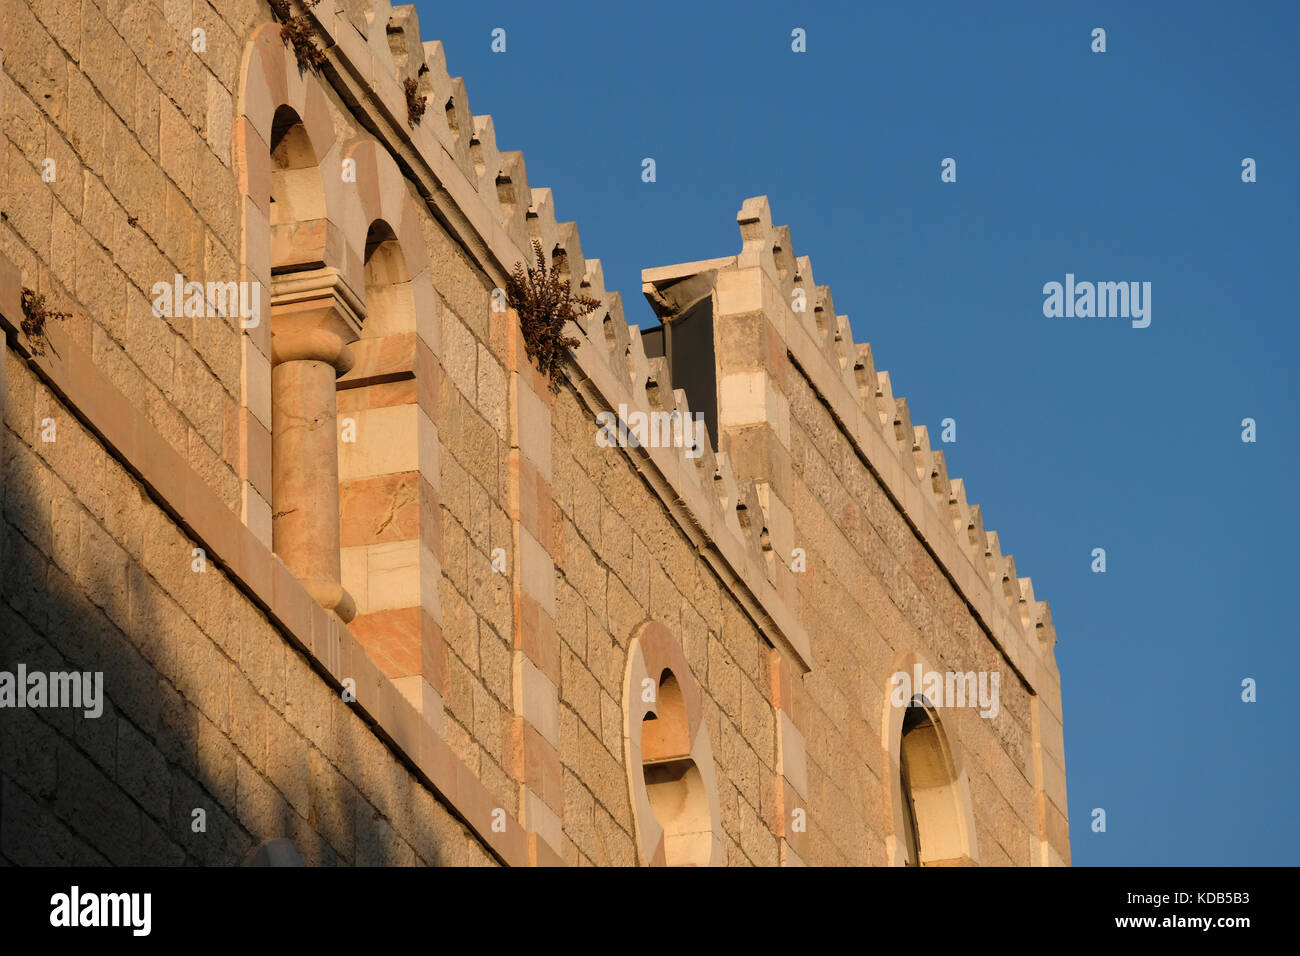 The parapet on the roof of Herbert Clark's Mansion, built in 1898 in  Mamilla neighborhood that was established in the late 19th century outside  the Old City. Jerusalem Israel Stock Photo - Alamy